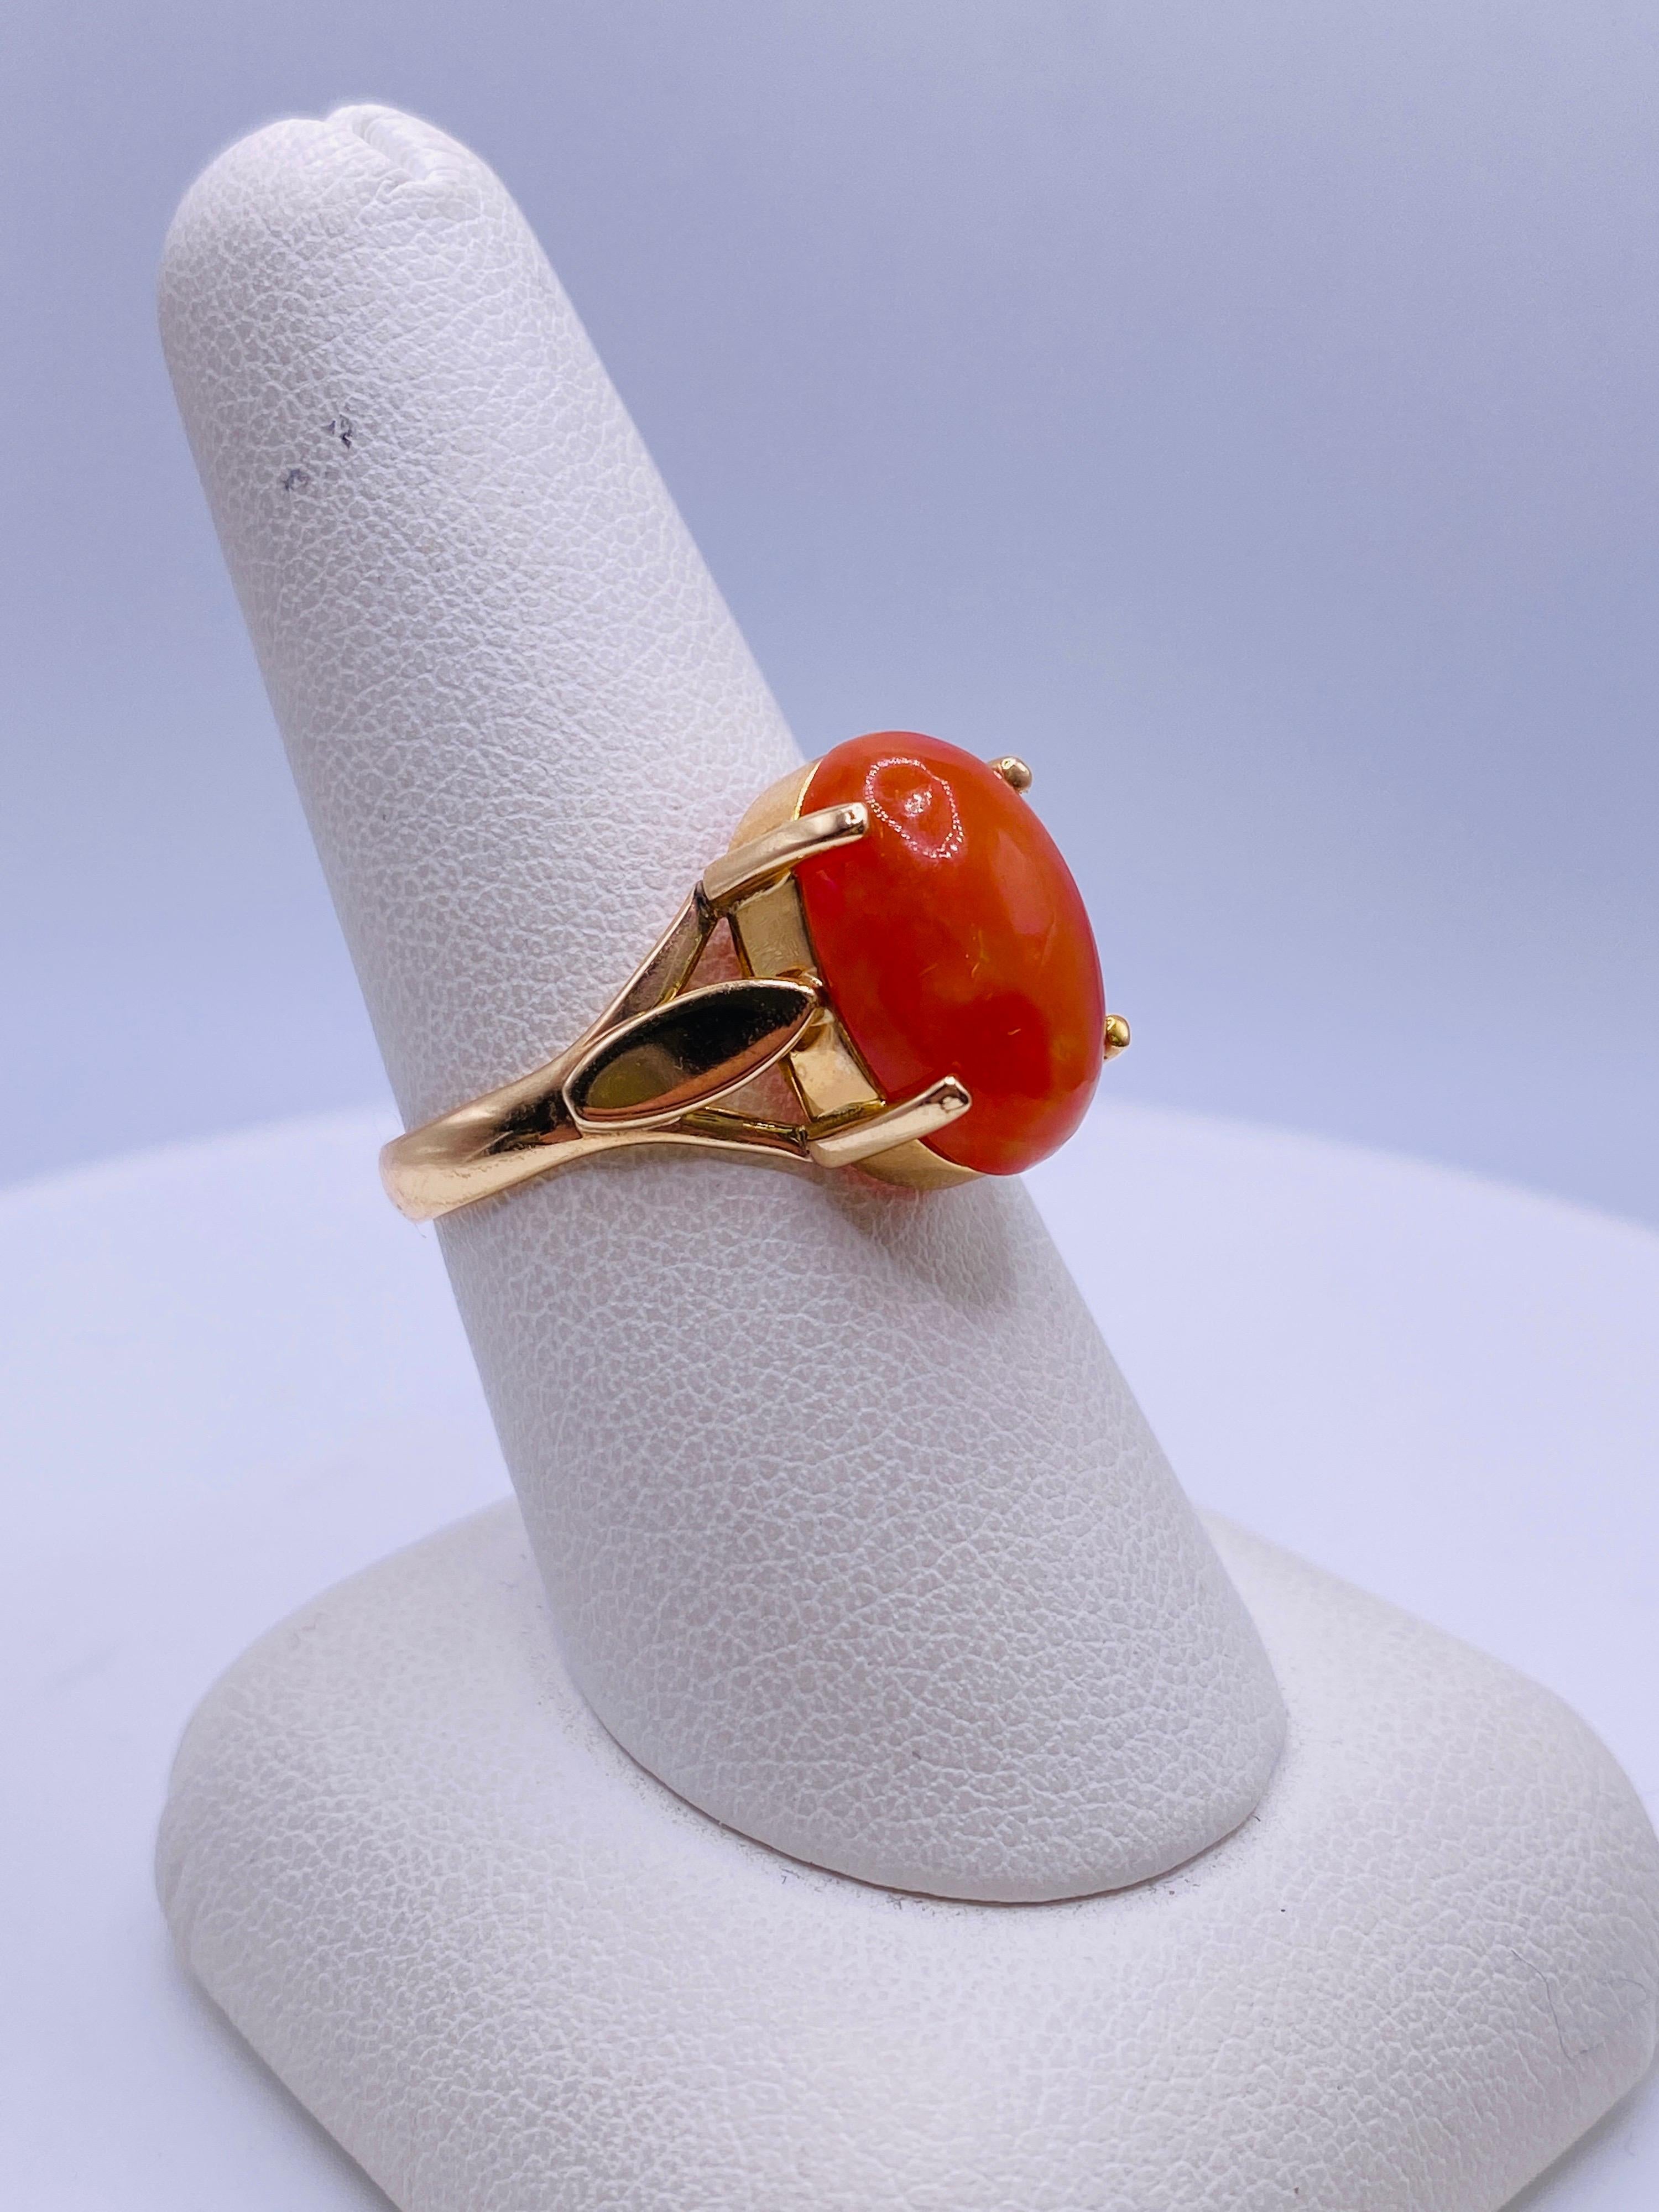 14k yellow gold cabochon cut Mexican fire opal ring. 2.8dwt. Size 8